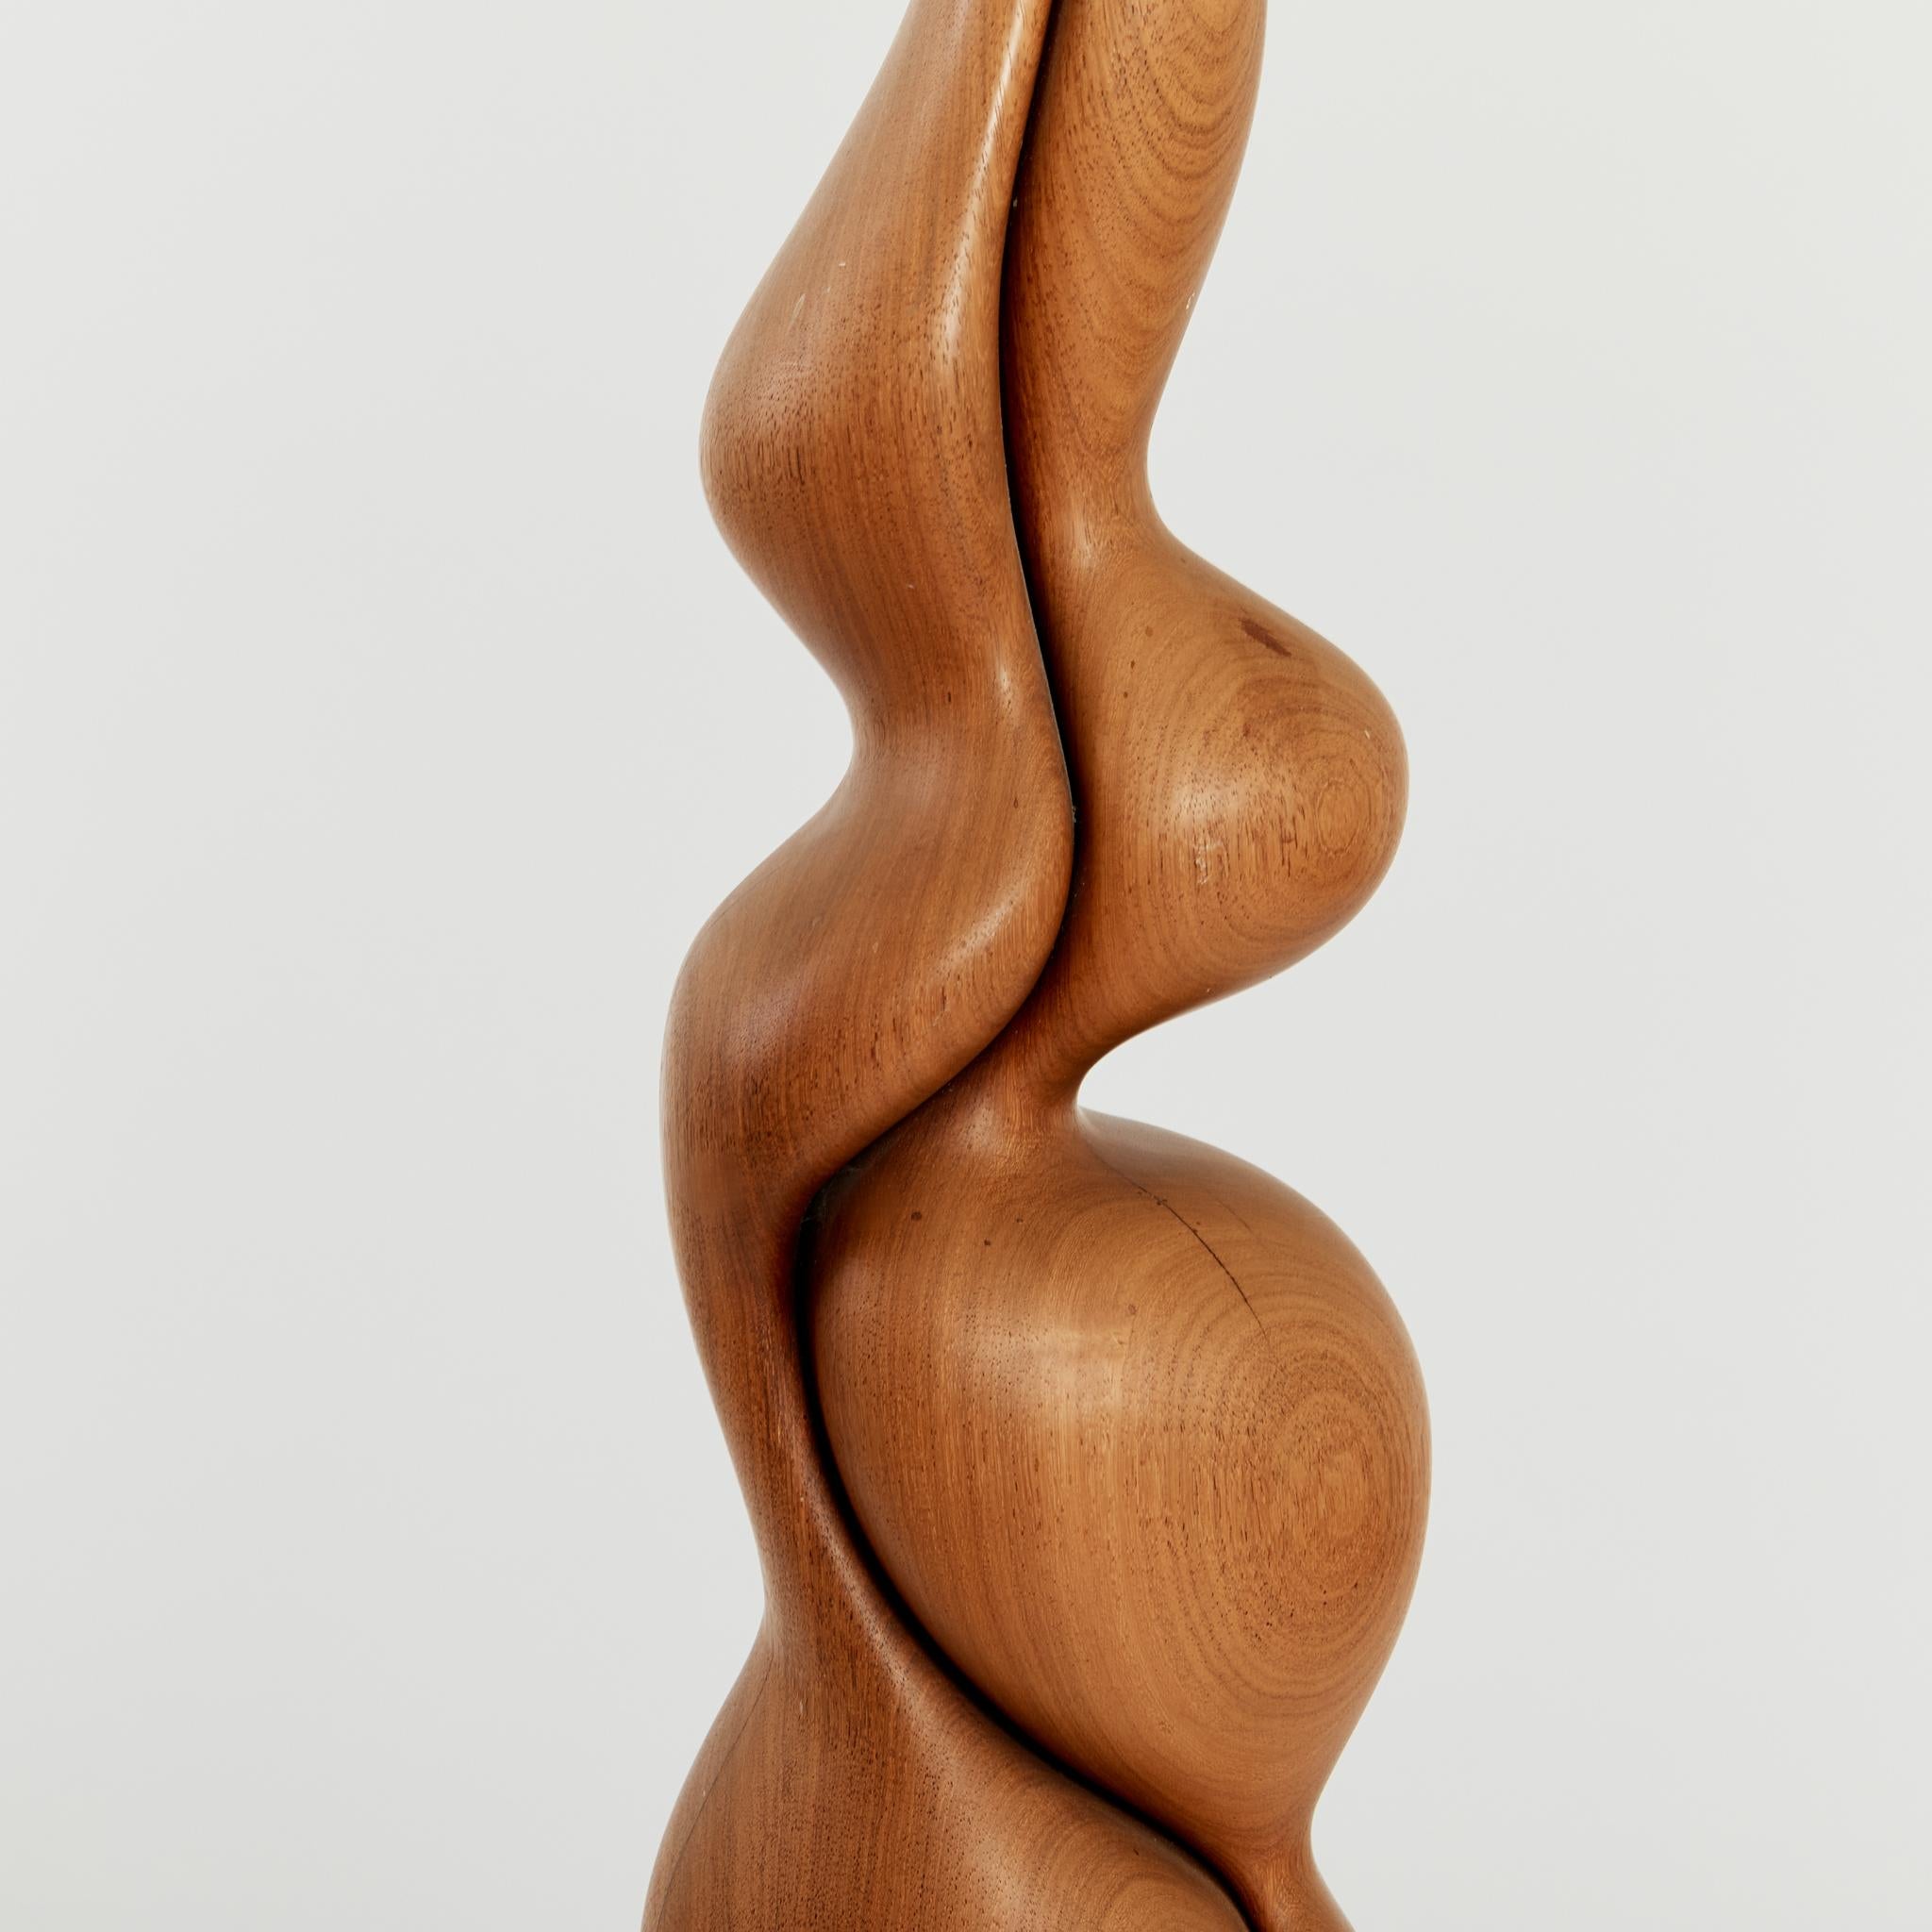 Tall Biomorphic Wood Floor Sculpture with Concrete Plinth 5